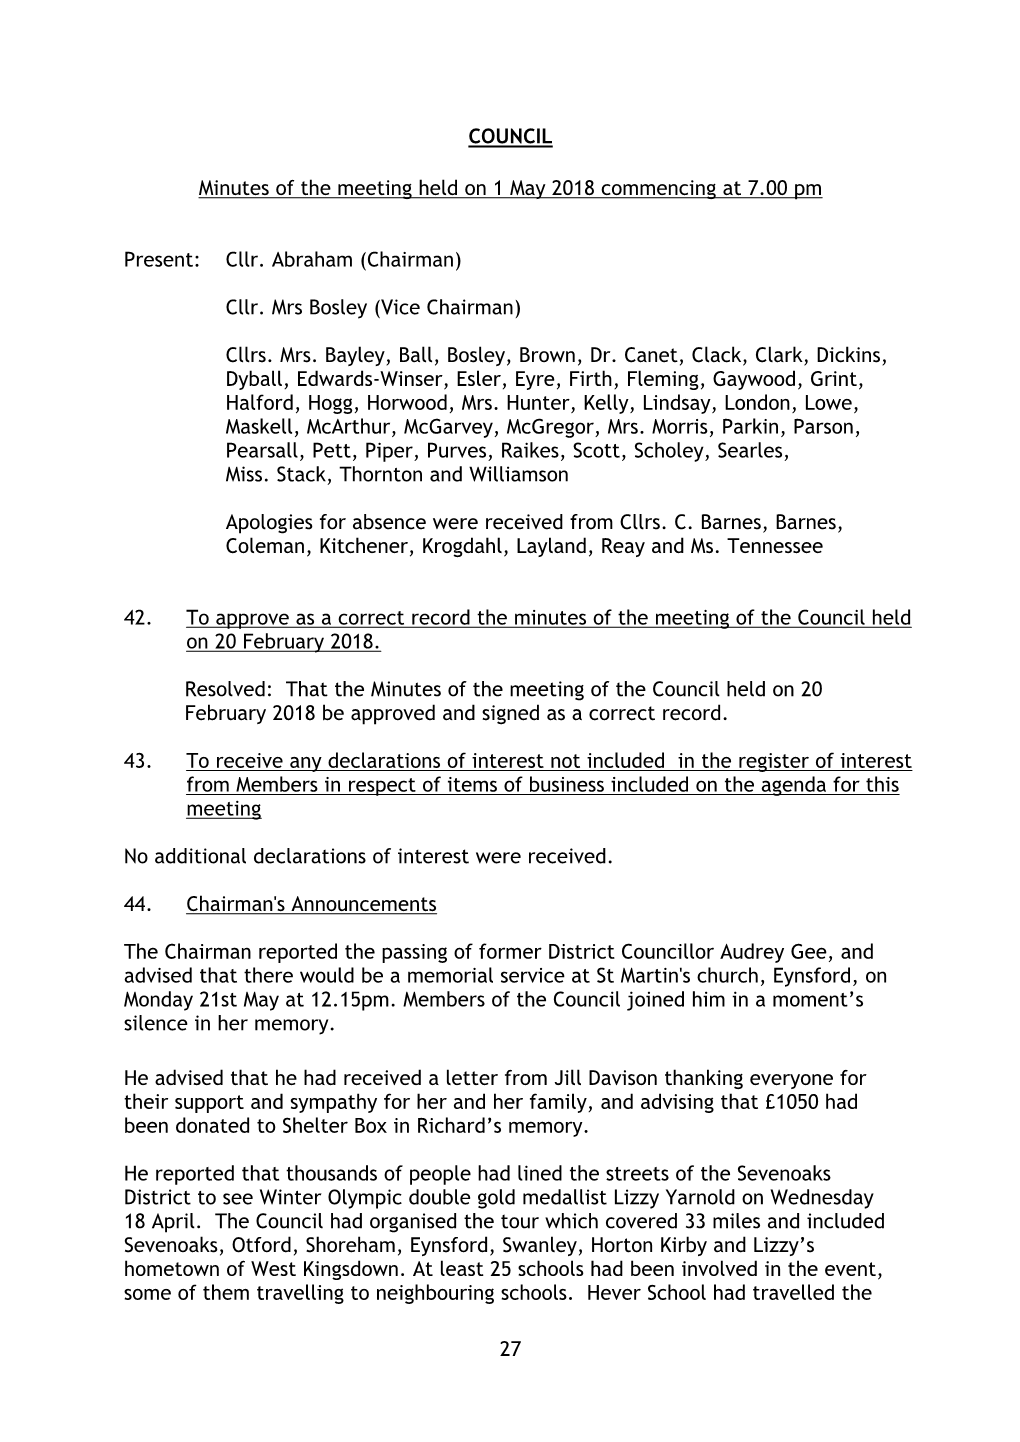 27 COUNCIL Minutes of the Meeting Held on 1 May 2018